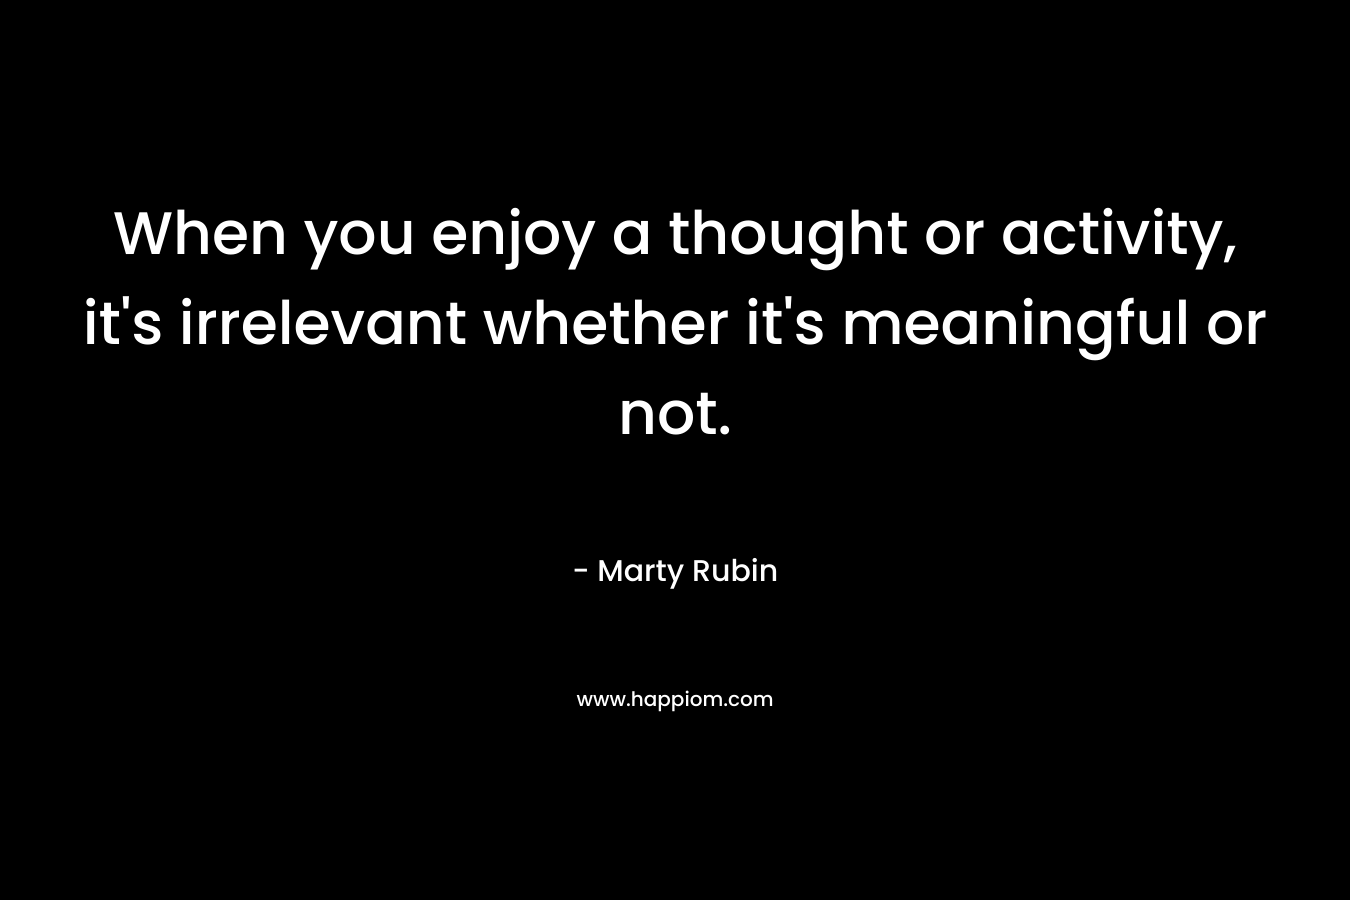 When you enjoy a thought or activity, it's irrelevant whether it's meaningful or not.